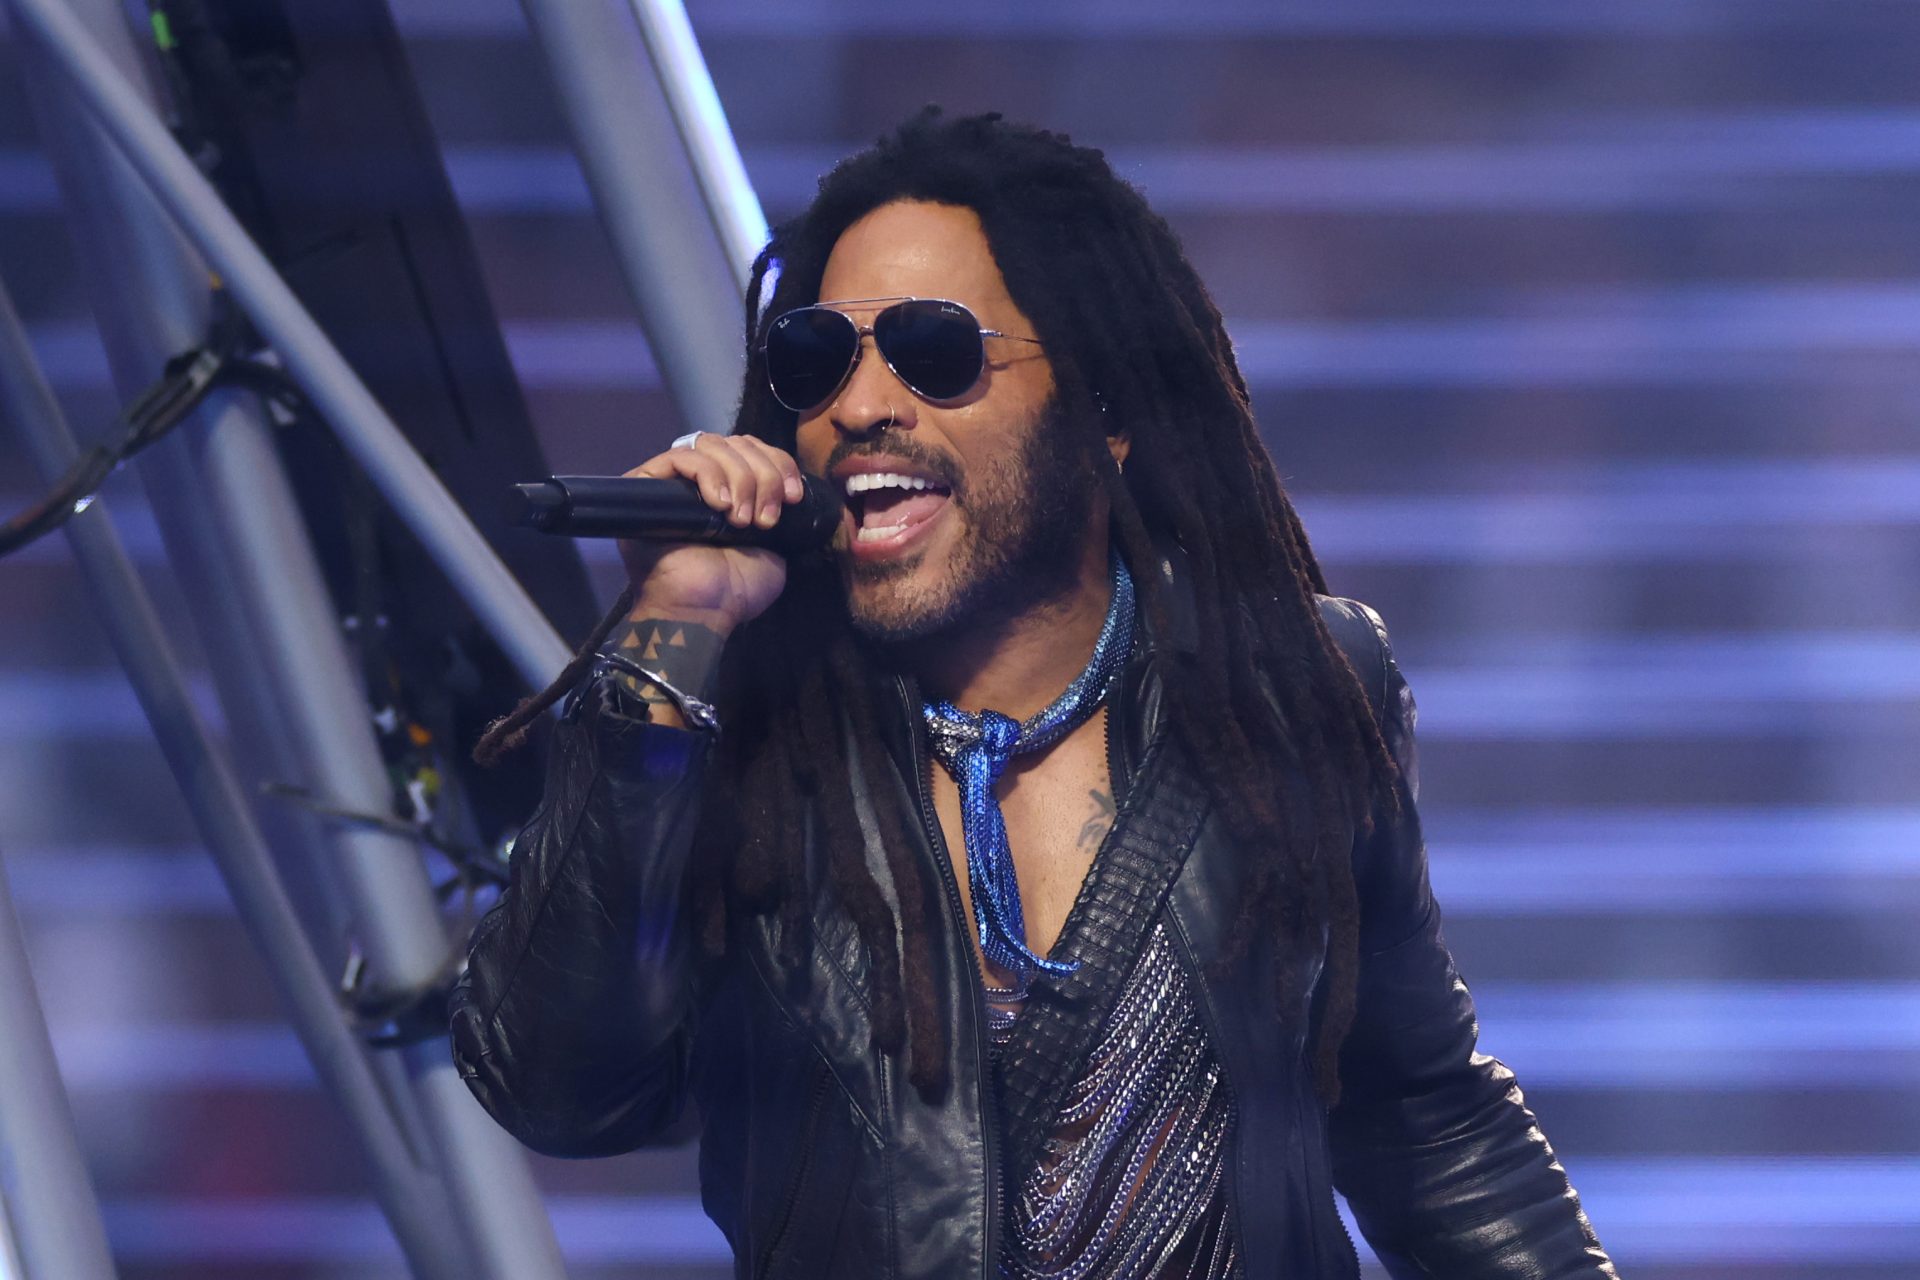 Lenny Kravitz' lifestyle is not what you'd expect